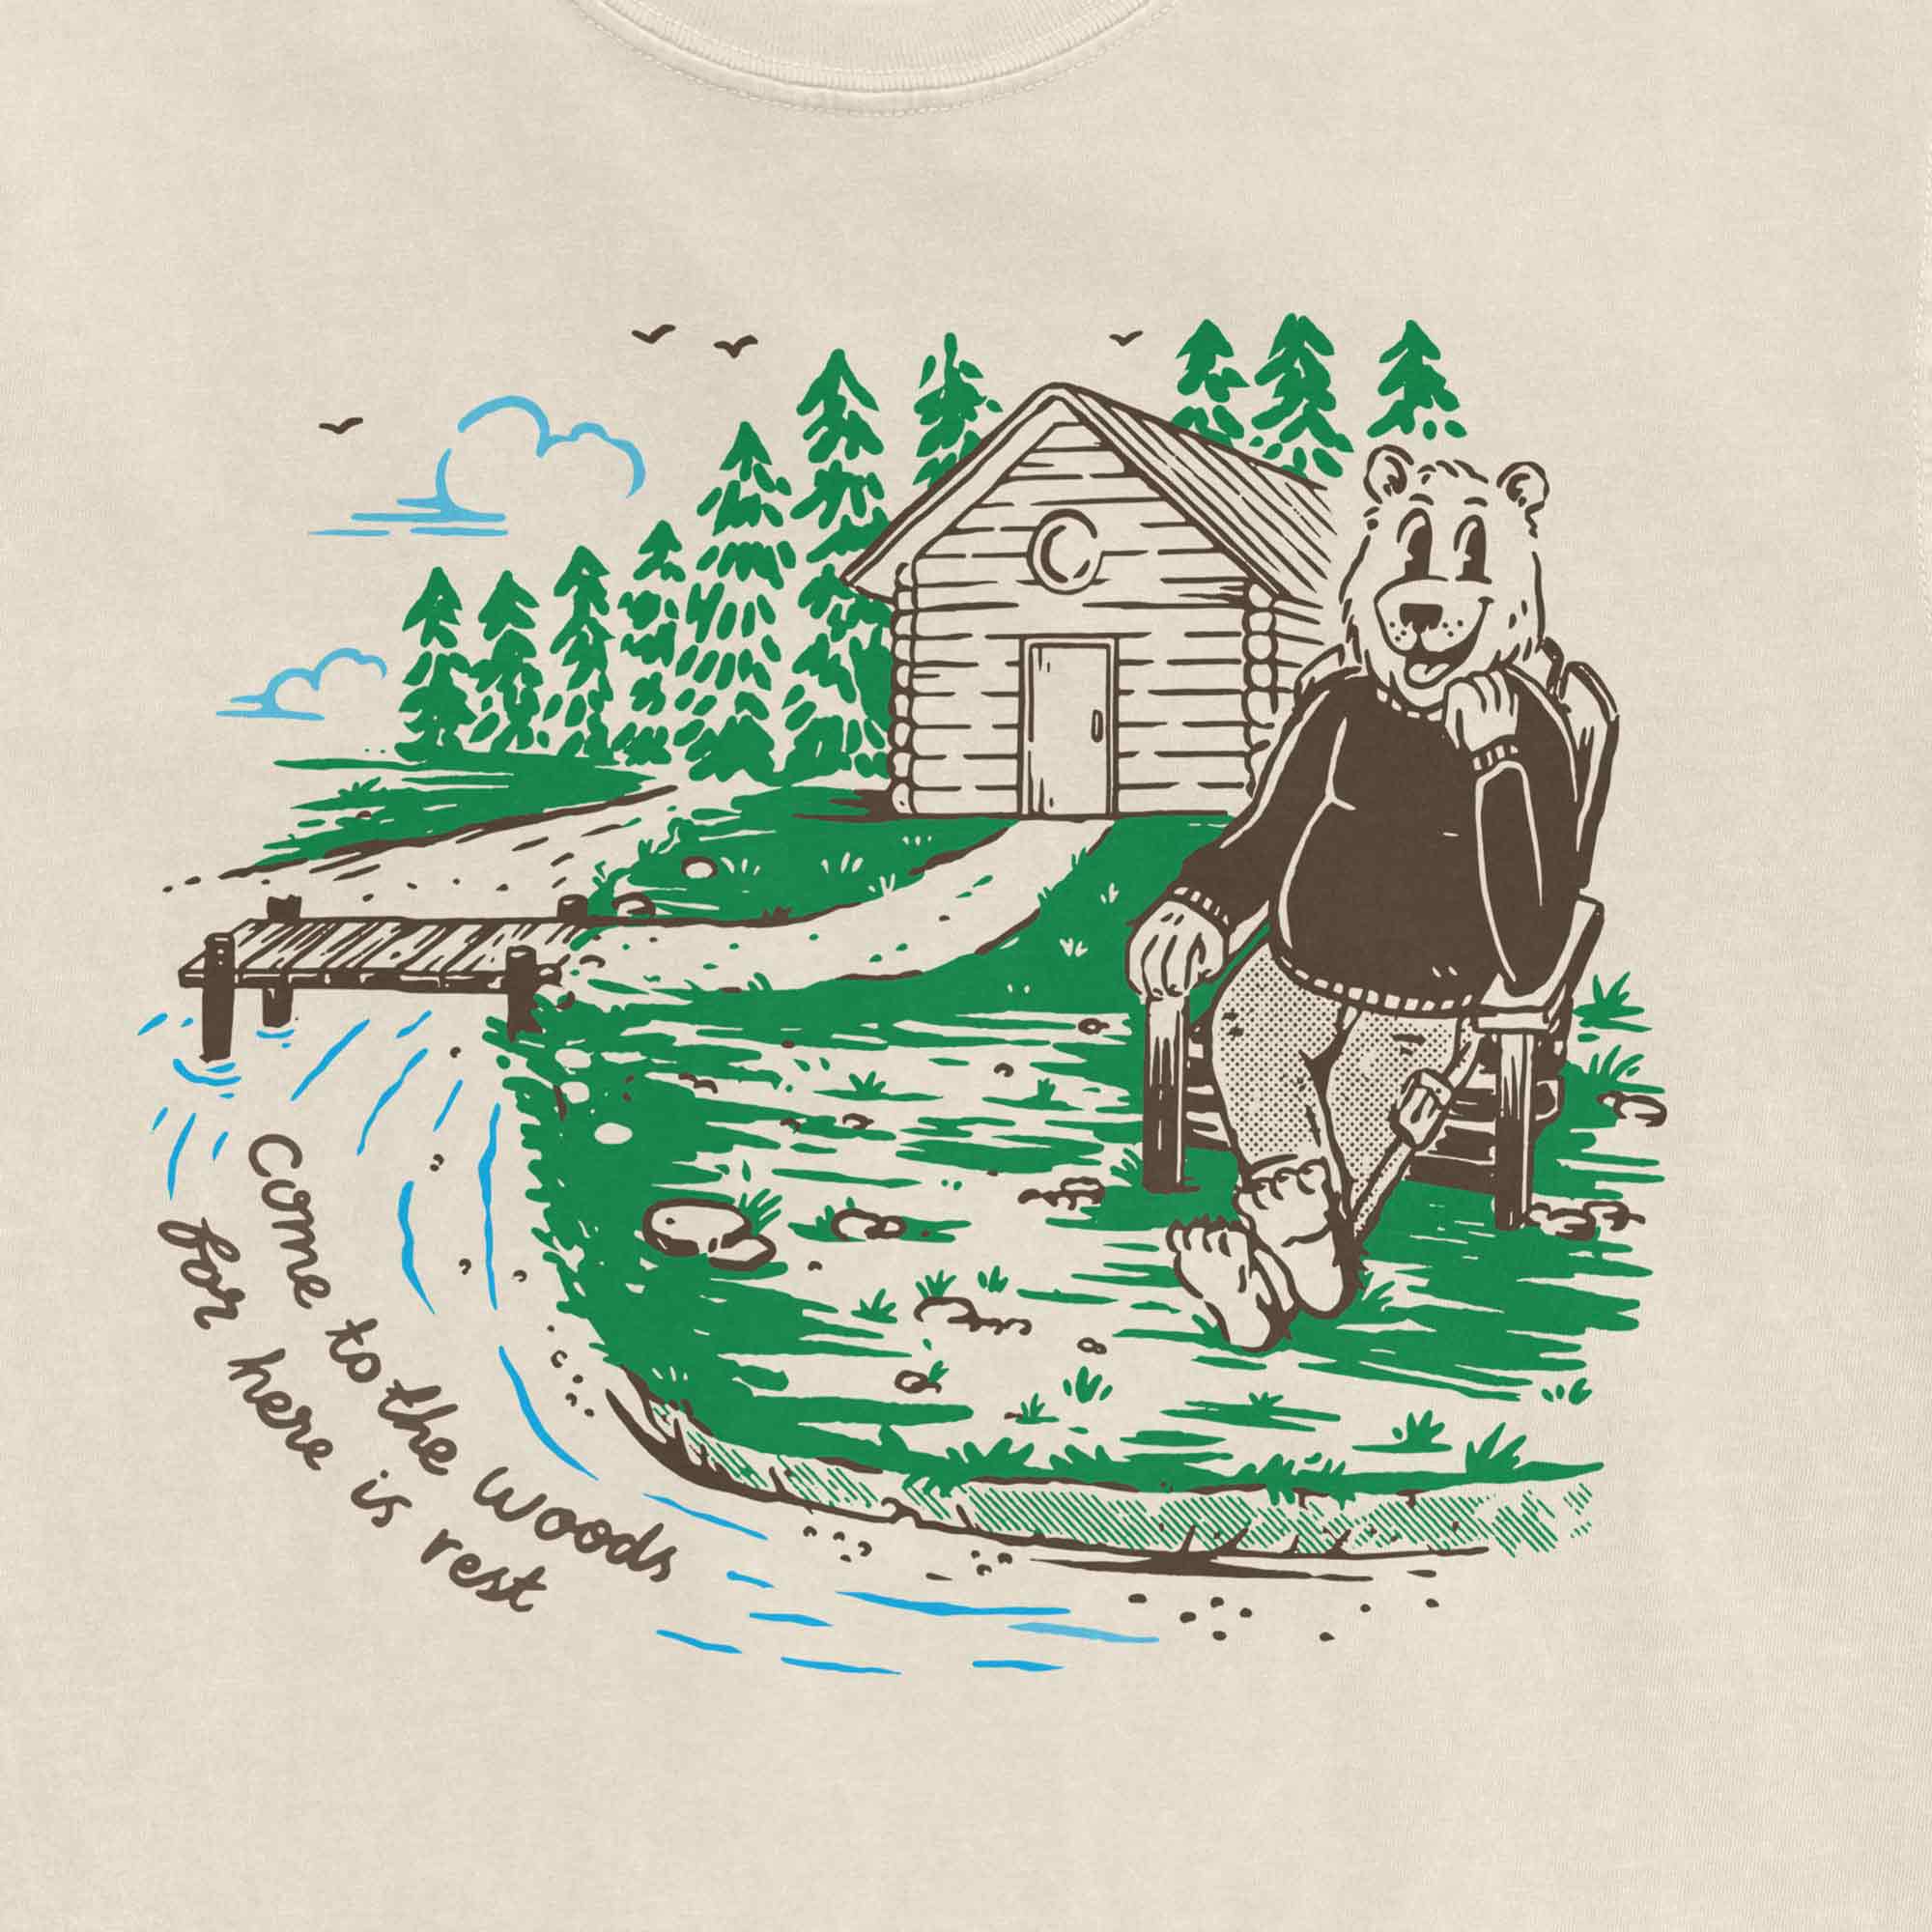 Cabin Life Cute Retro Bear Character T-Shirt by Nurtured by Nature Studio Hiking, Camping, Outdoorsy Gift